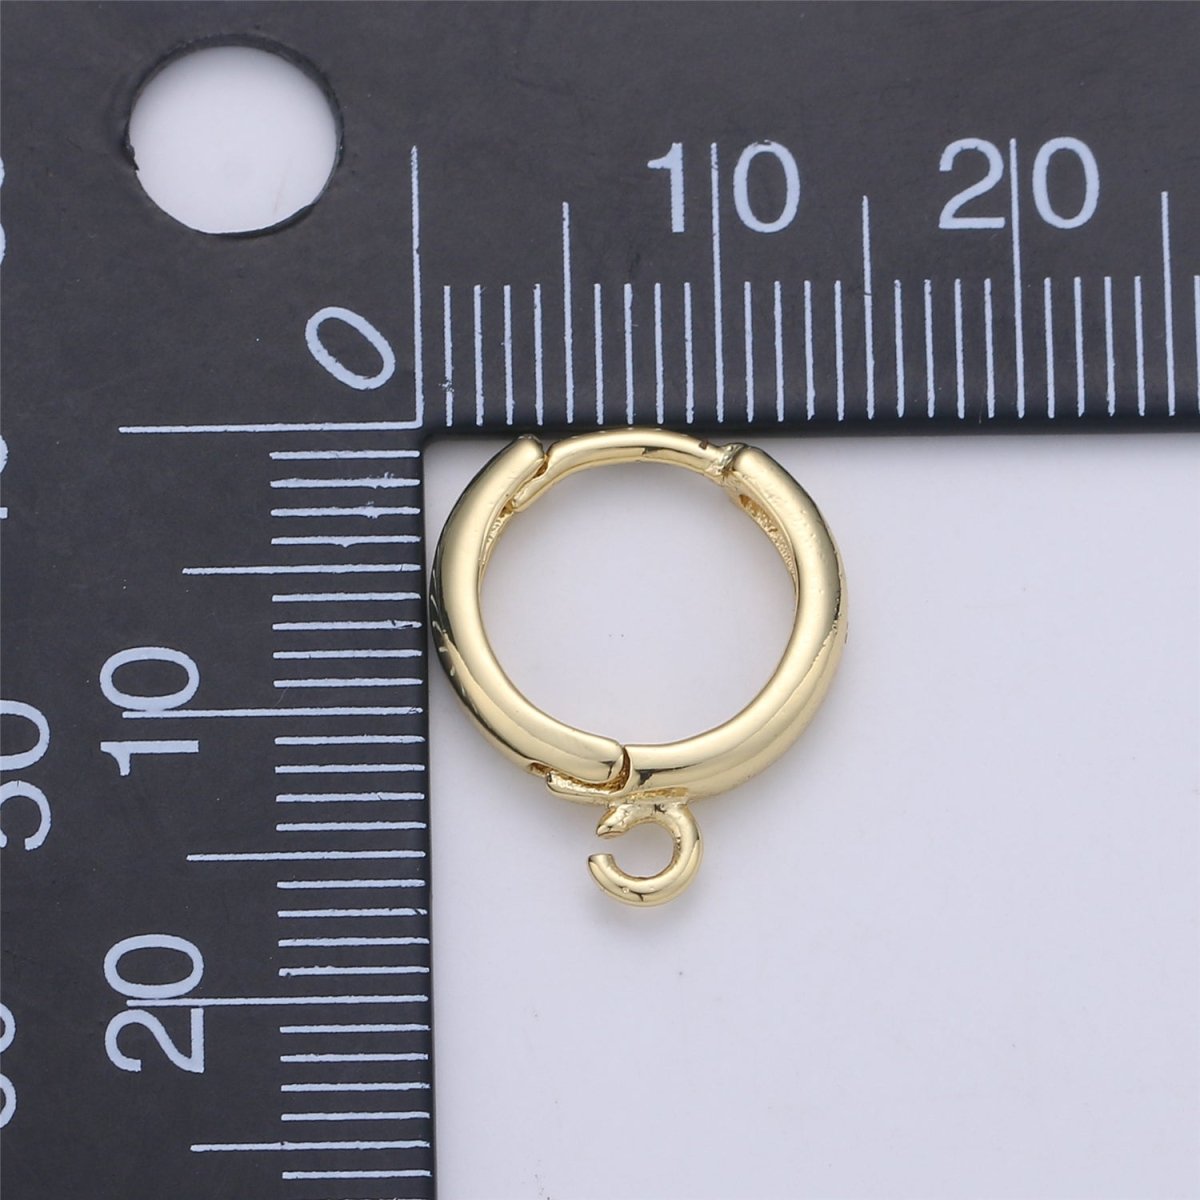 24K Simple Golden Gold Filled Huggies One Touch Earring - K-350 - DLUXCA